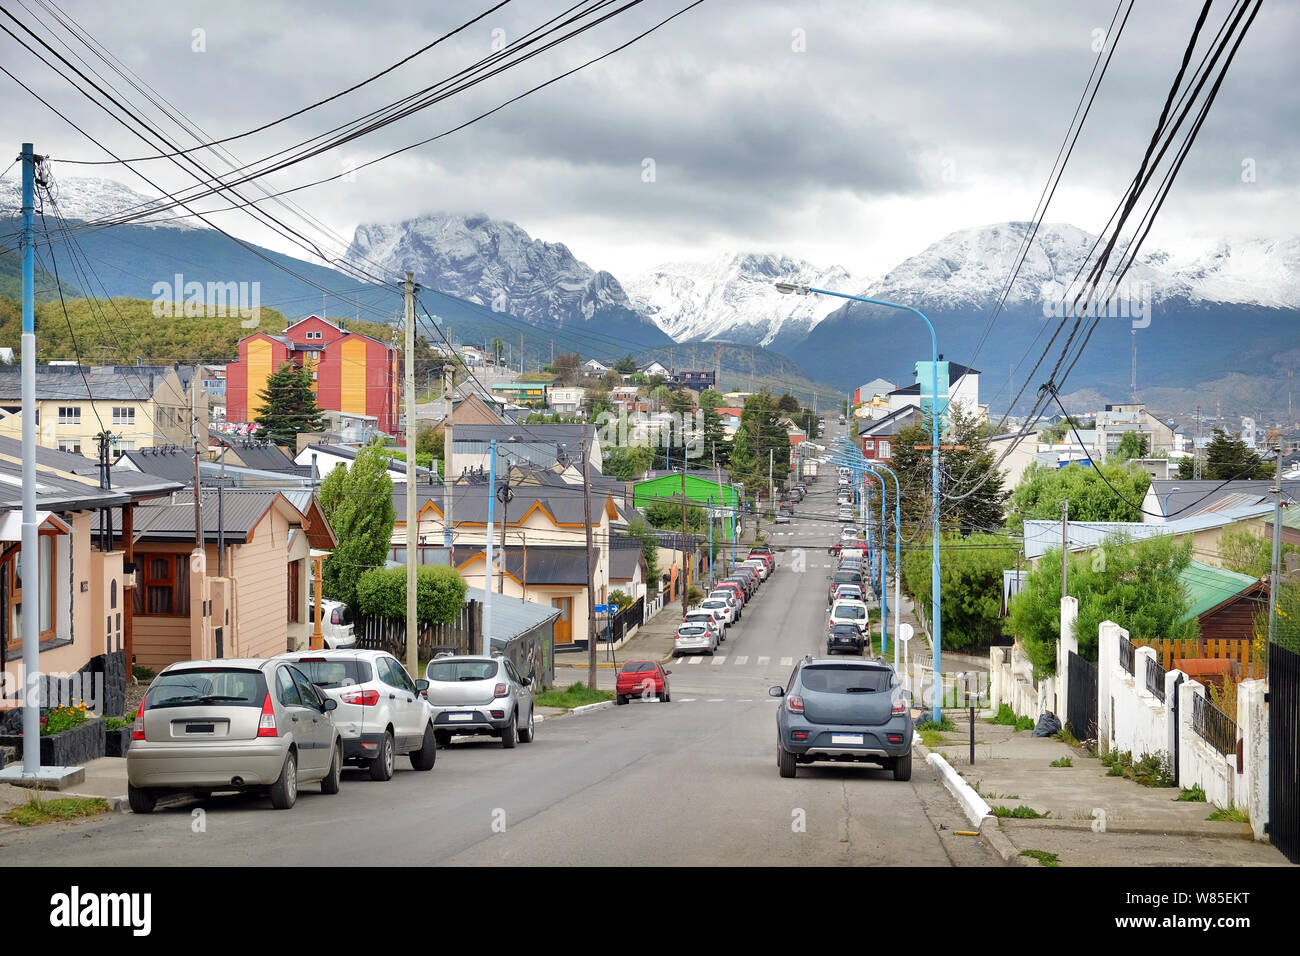 Cars on the streets of Ushuaia, in Tierra del Fuego, Argentina, surrounded by green vegetation, during a clouded day with a grey sky. Stock Photo